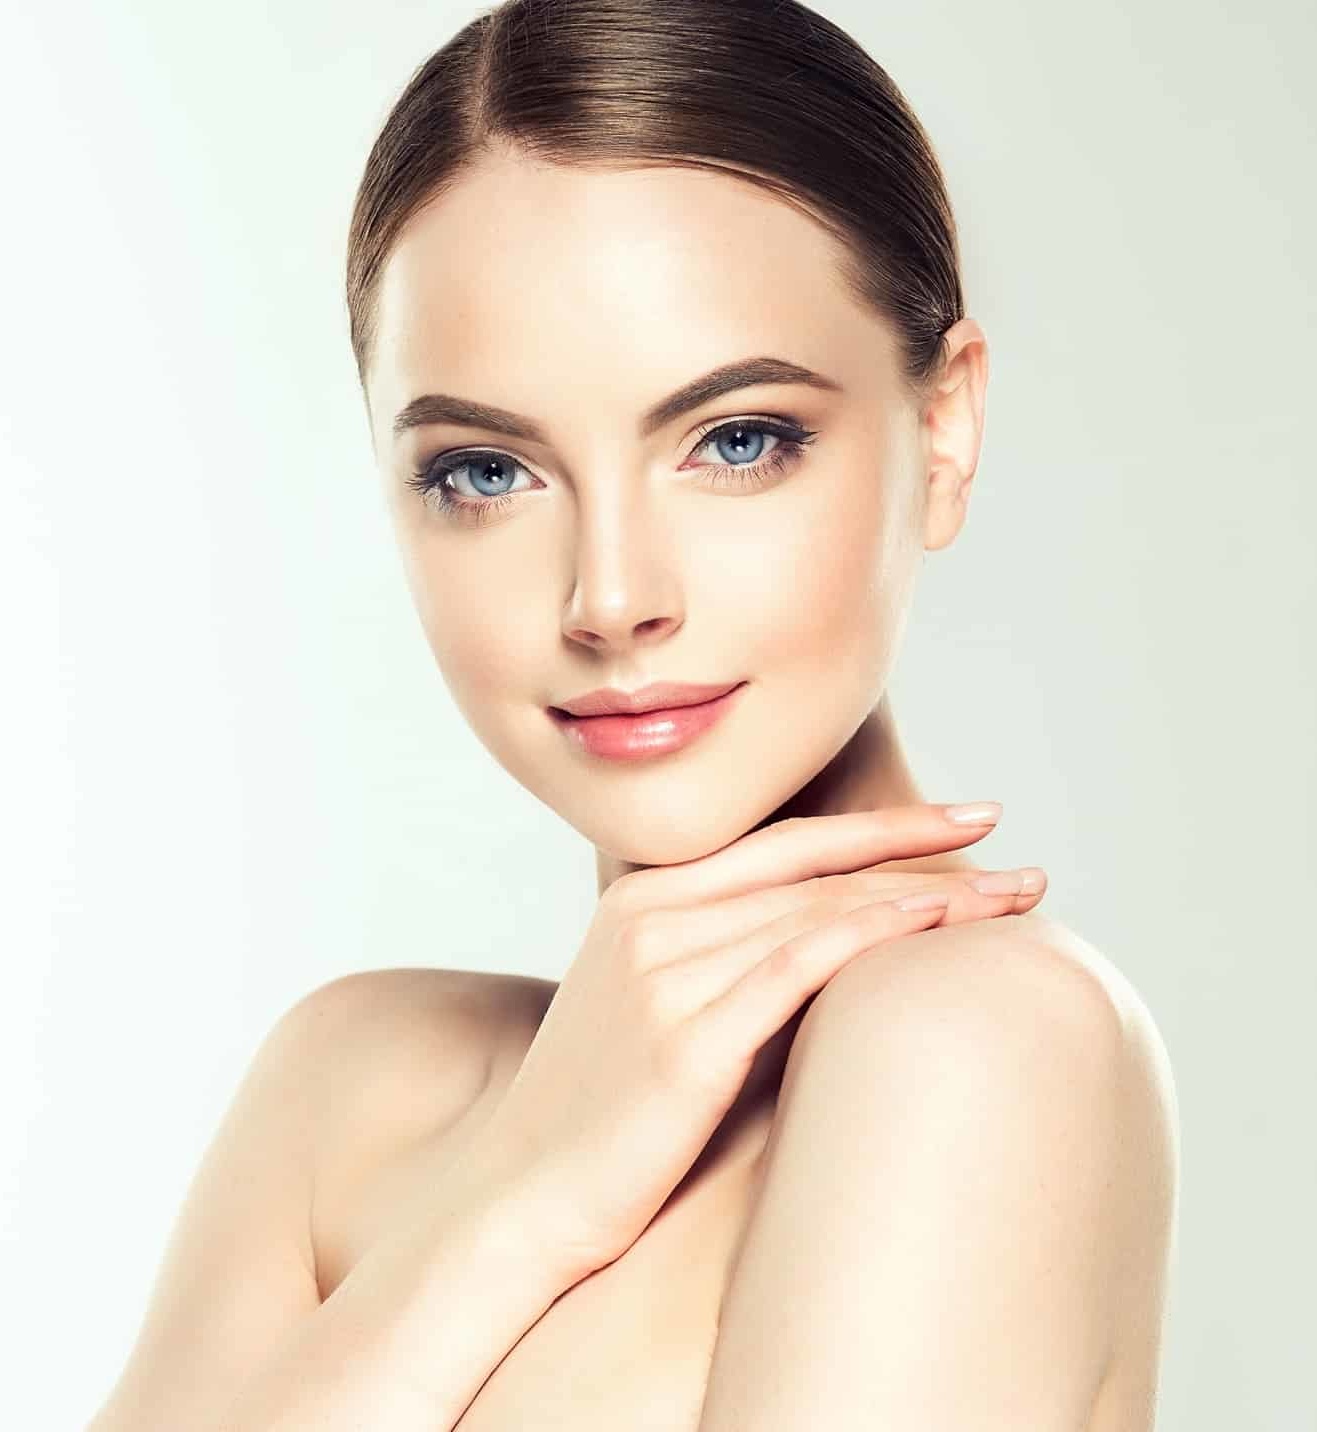 Gorgeous, young woman with clean, fresh skin is touching own face. Light smile on the perfect face.